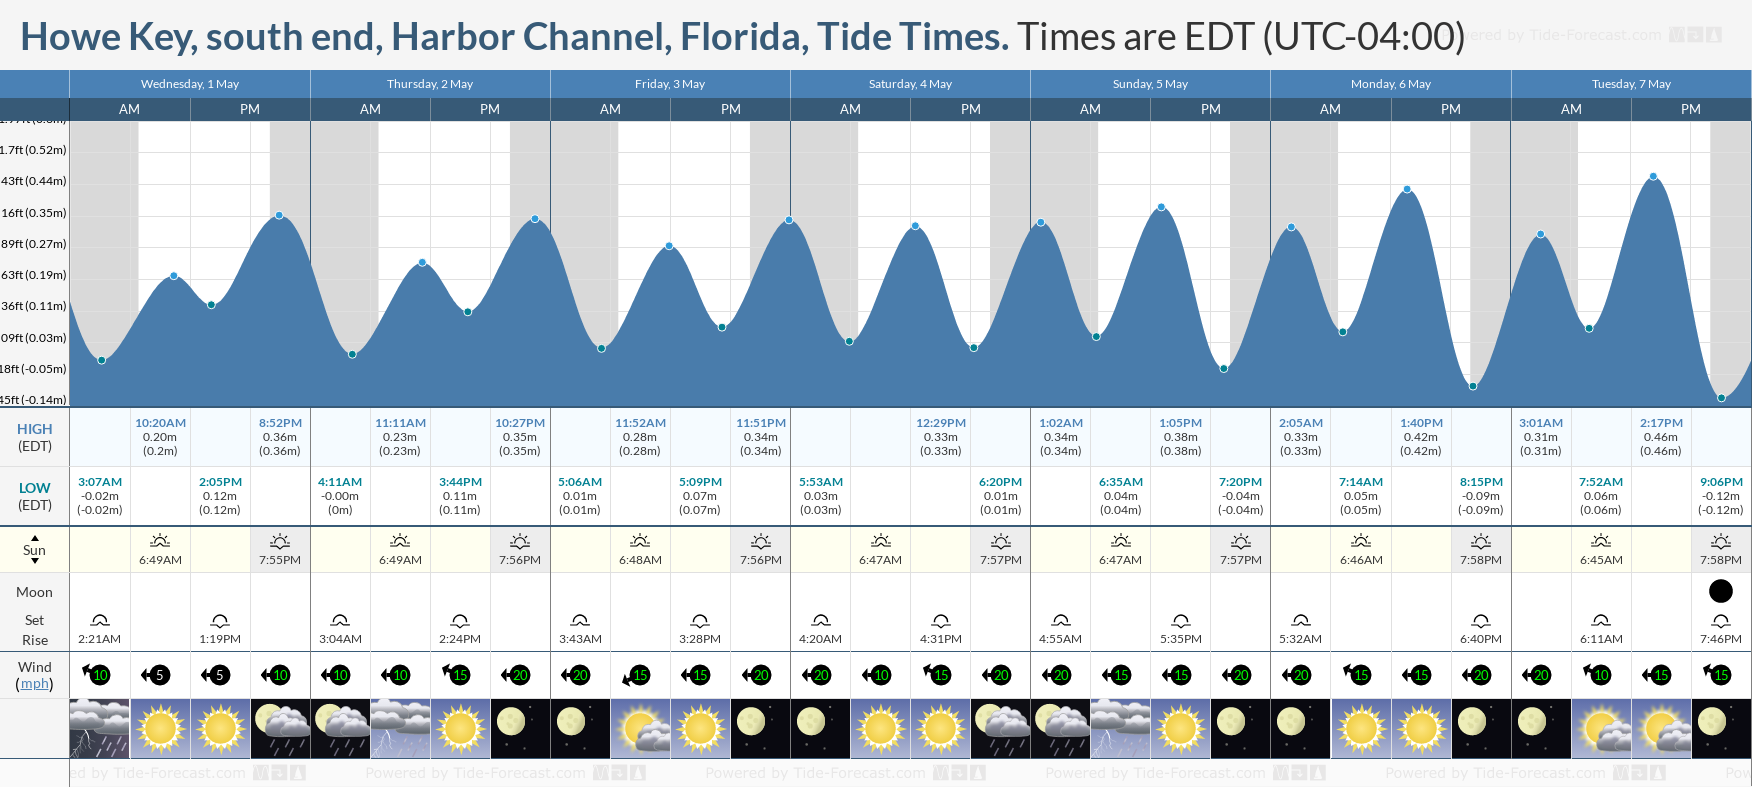 Howe Key, south end, Harbor Channel, Florida Tide Chart including high and low tide tide times for the next 7 days